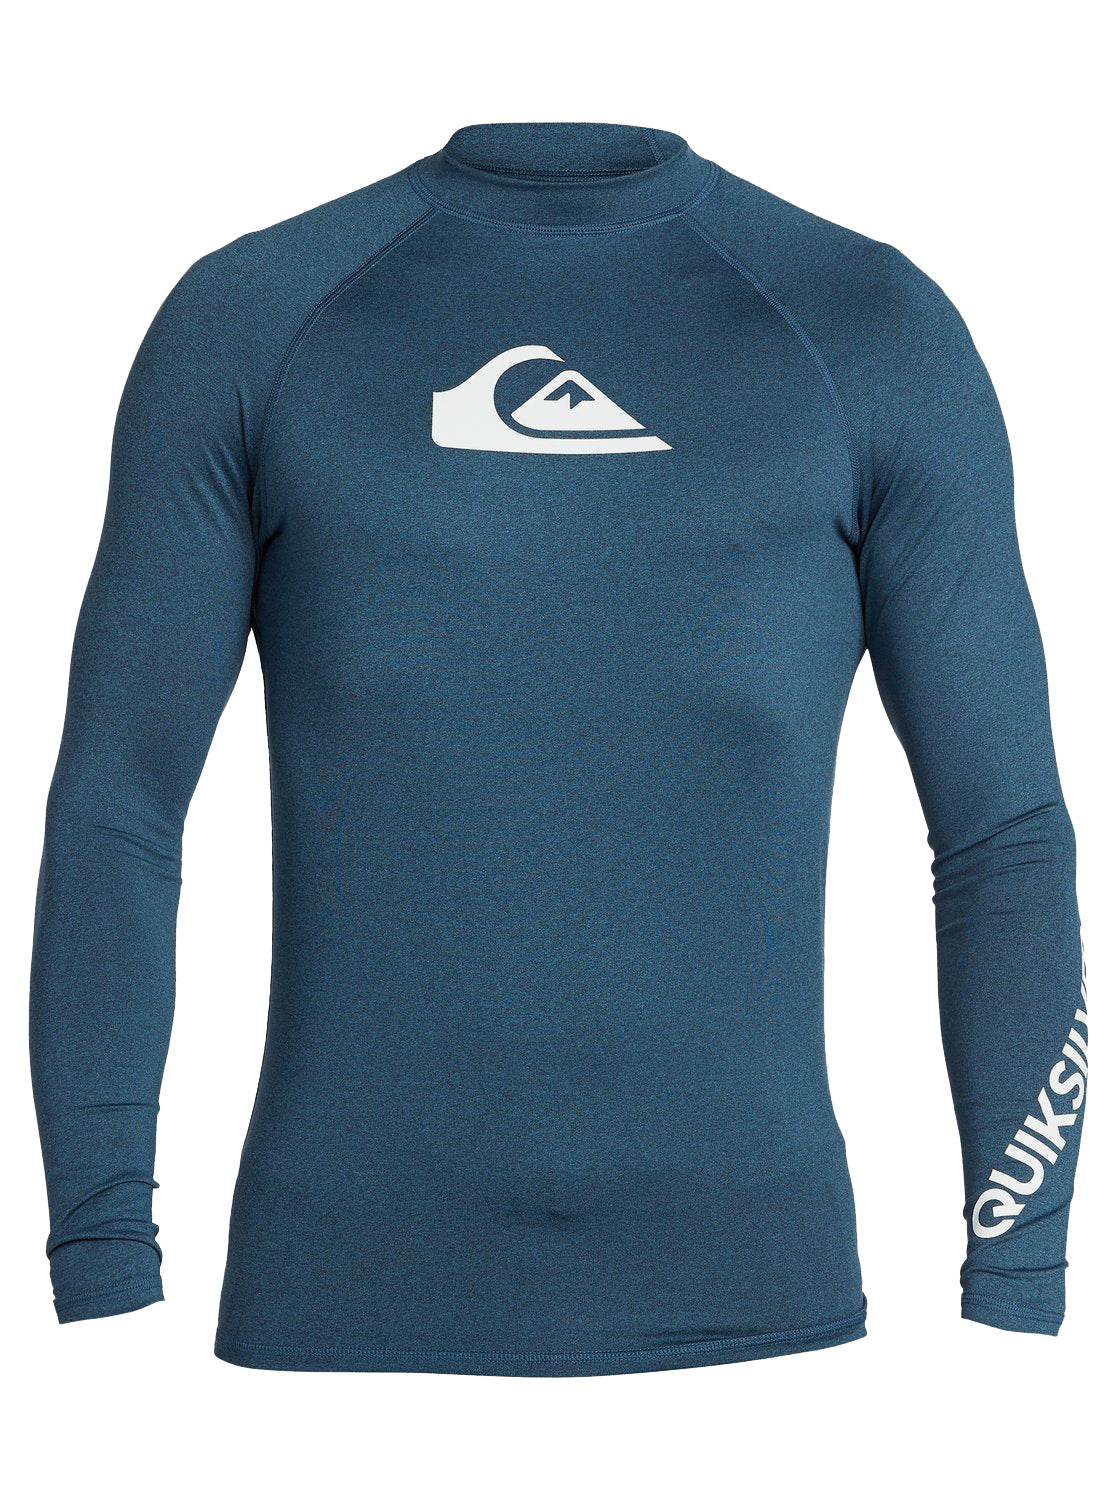 Quiksilver All Time LS Youth Lycra BSMH XL/16